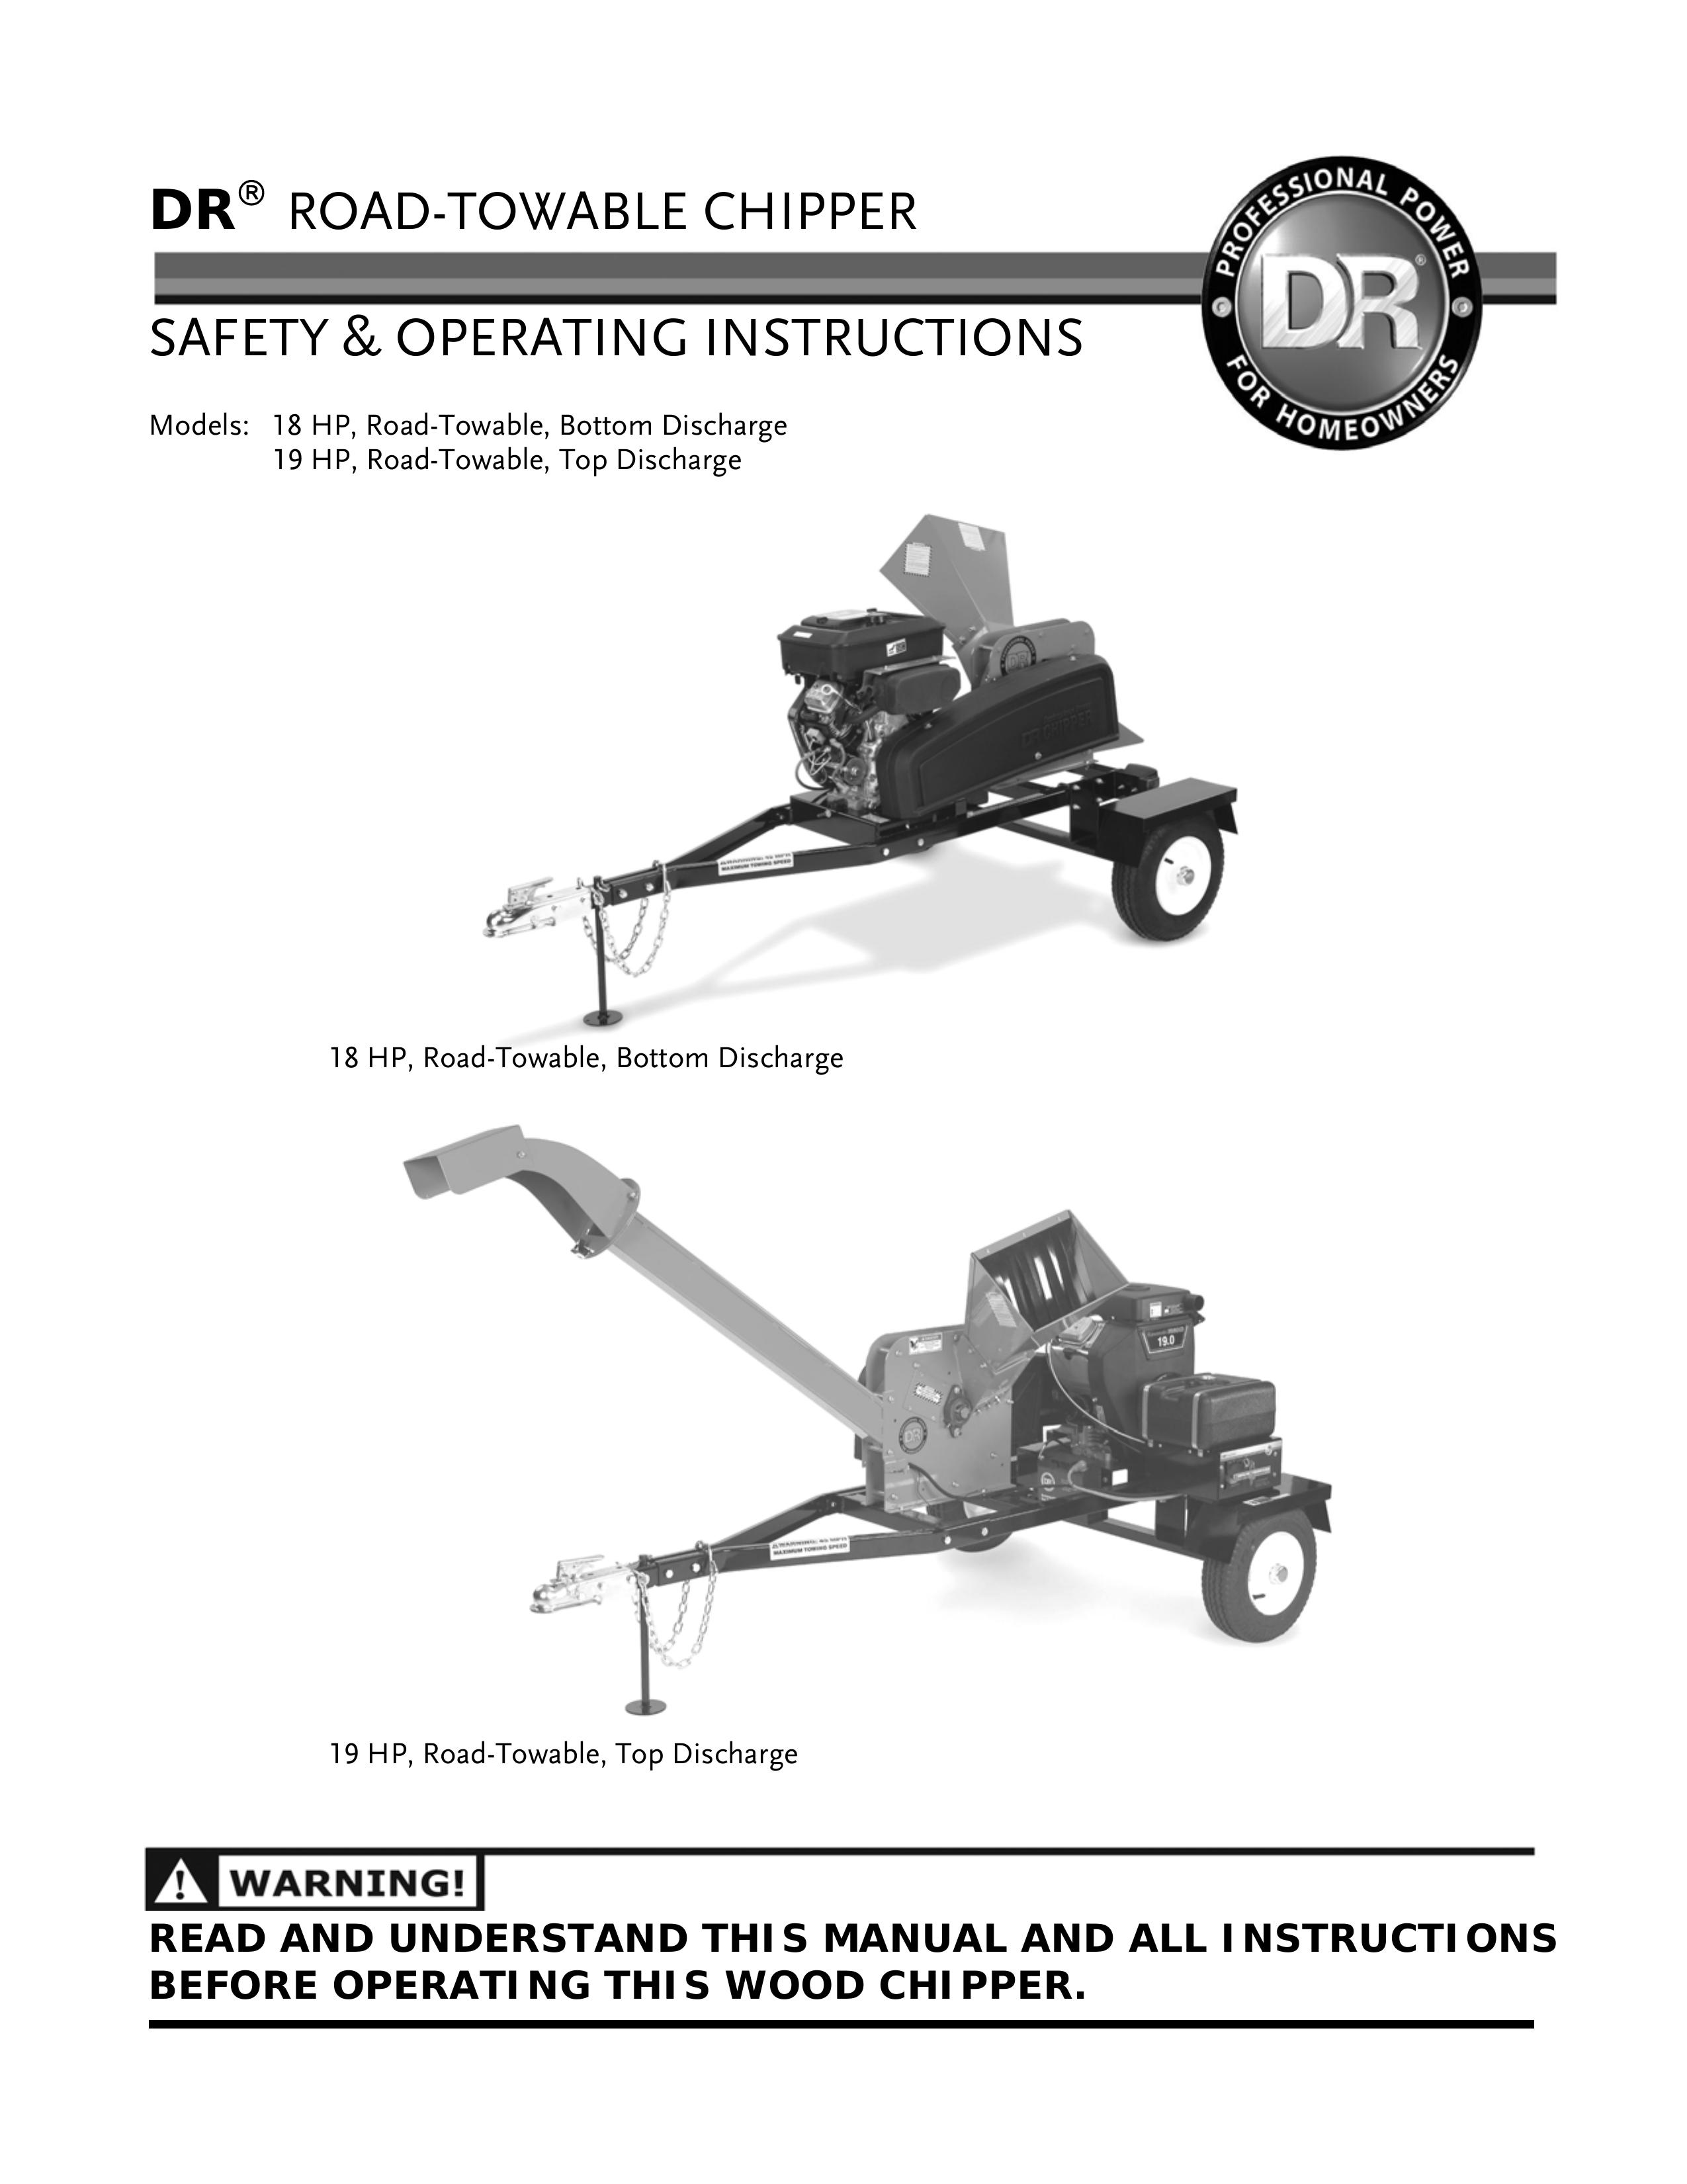 Country Home Products 18 HP Chipper User Manual